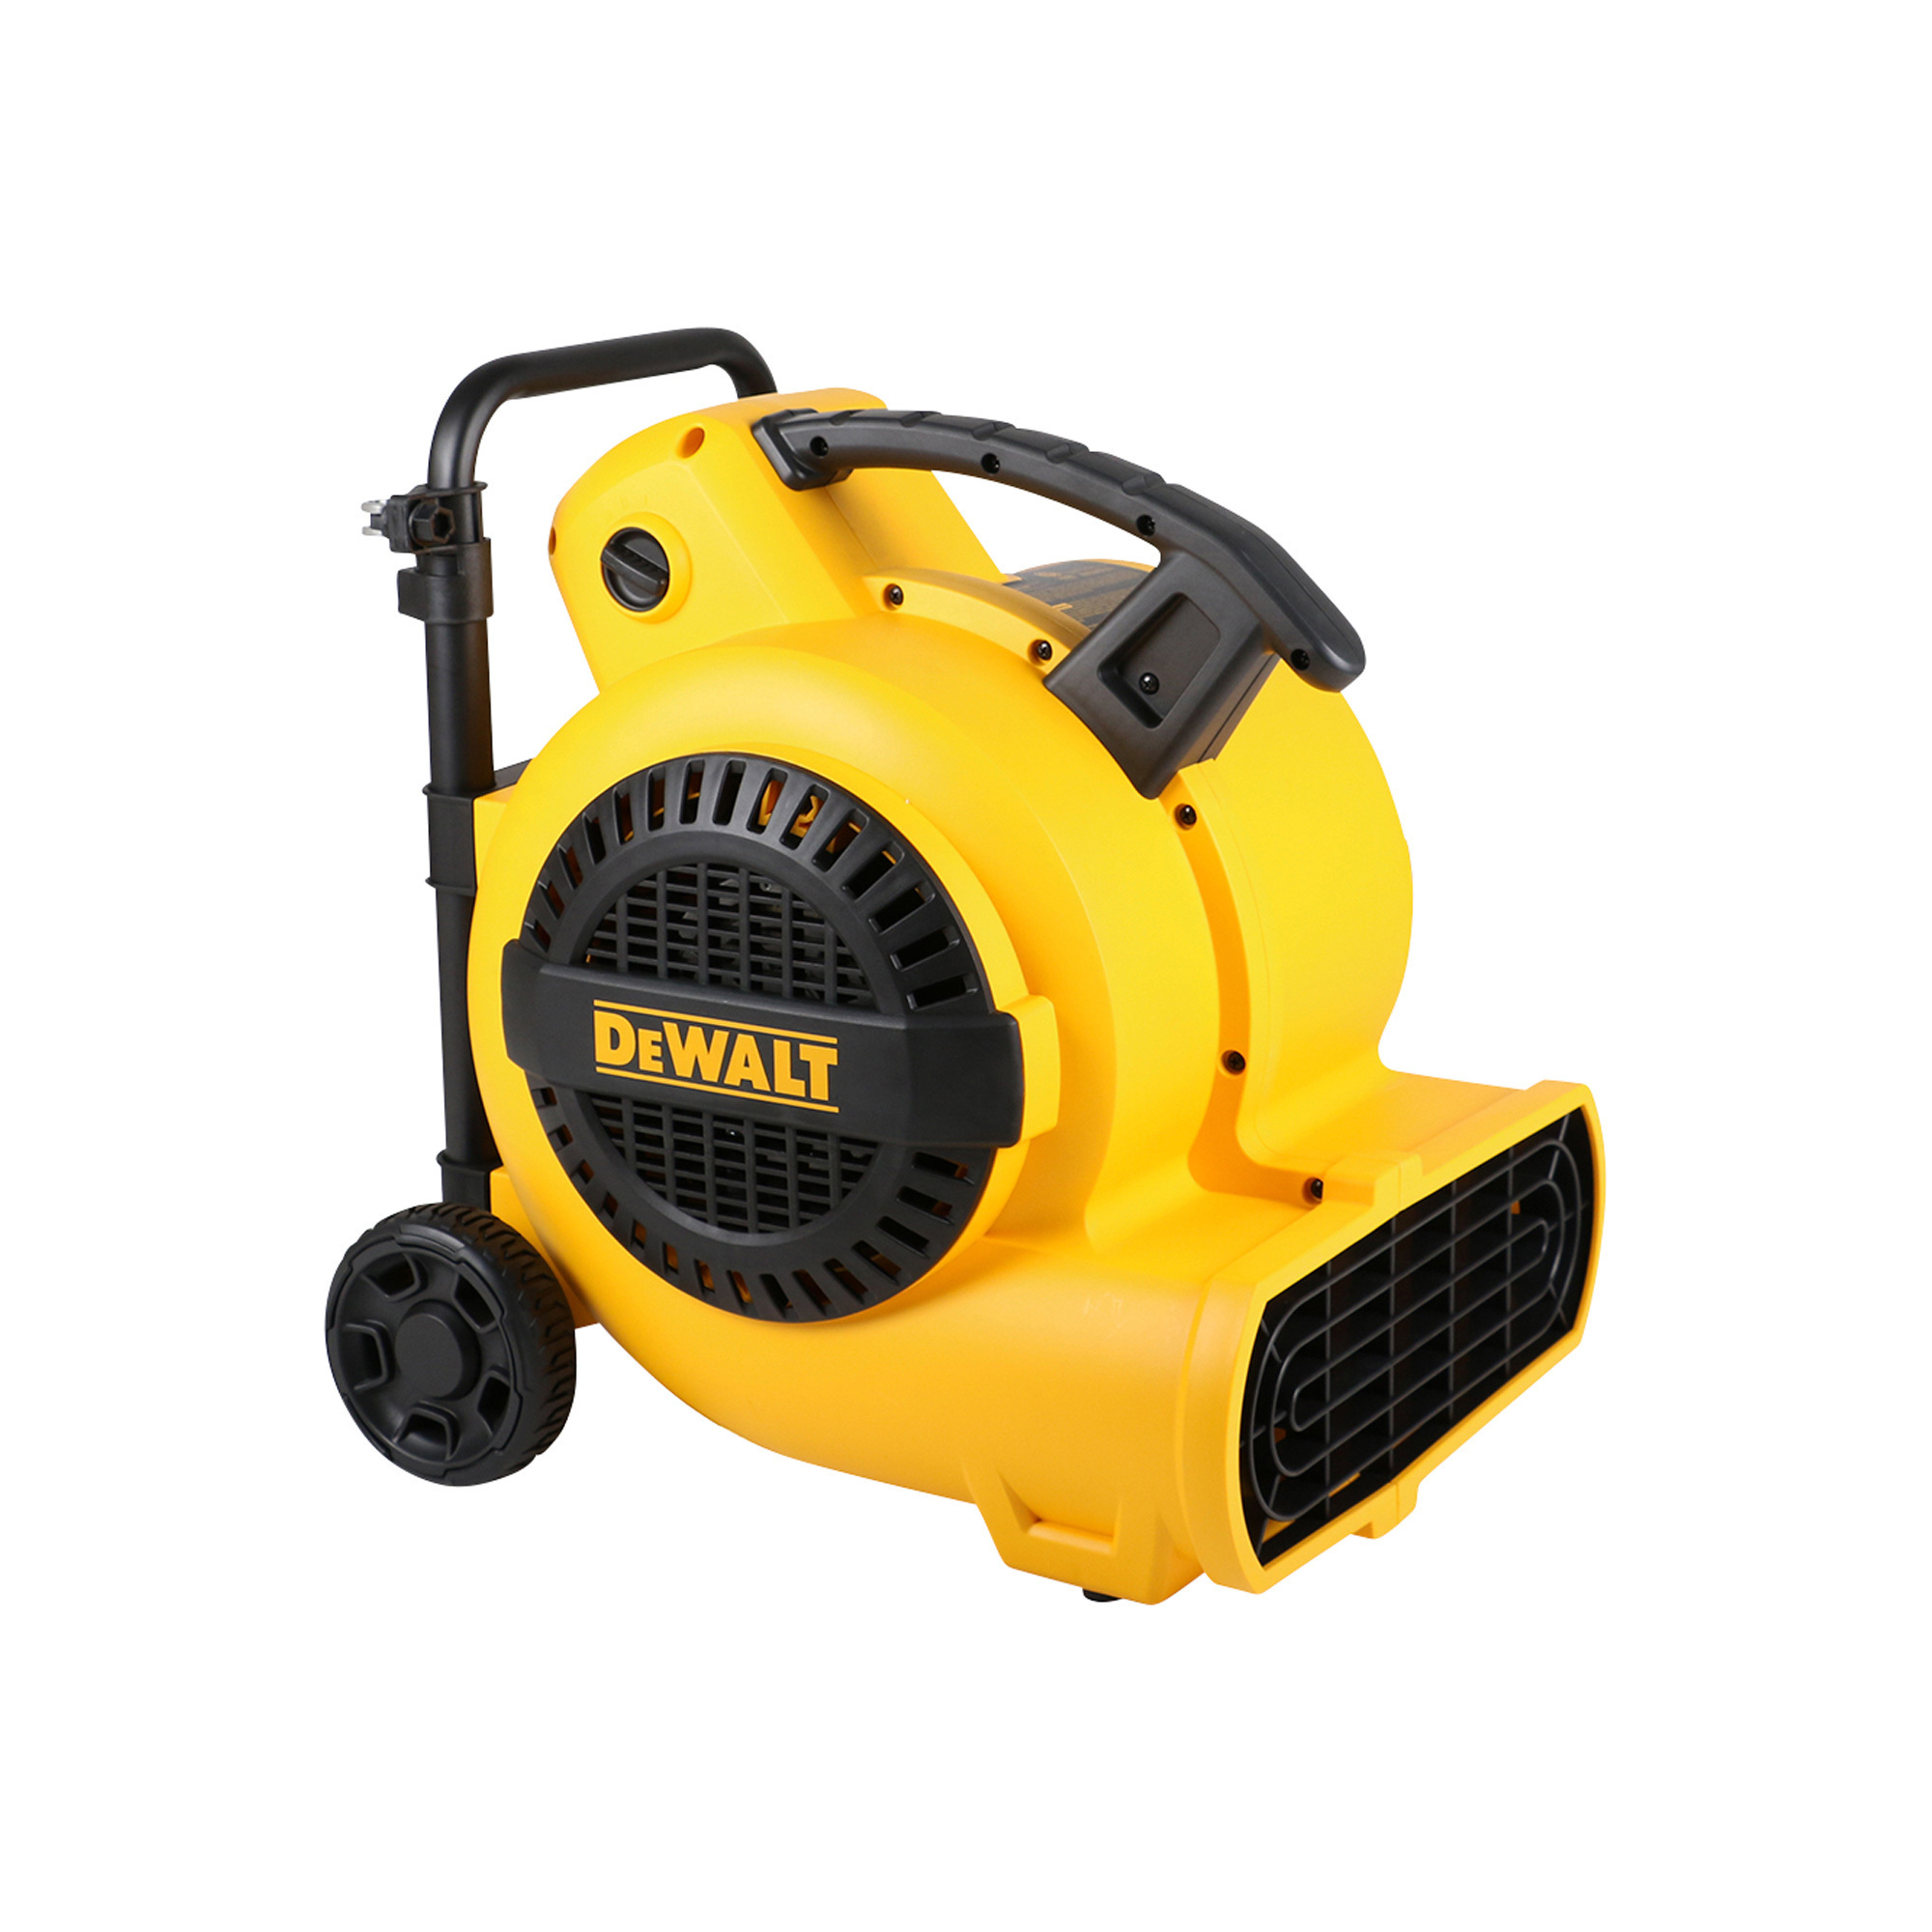 Floor Blowers, Air Movers, Axial Fans